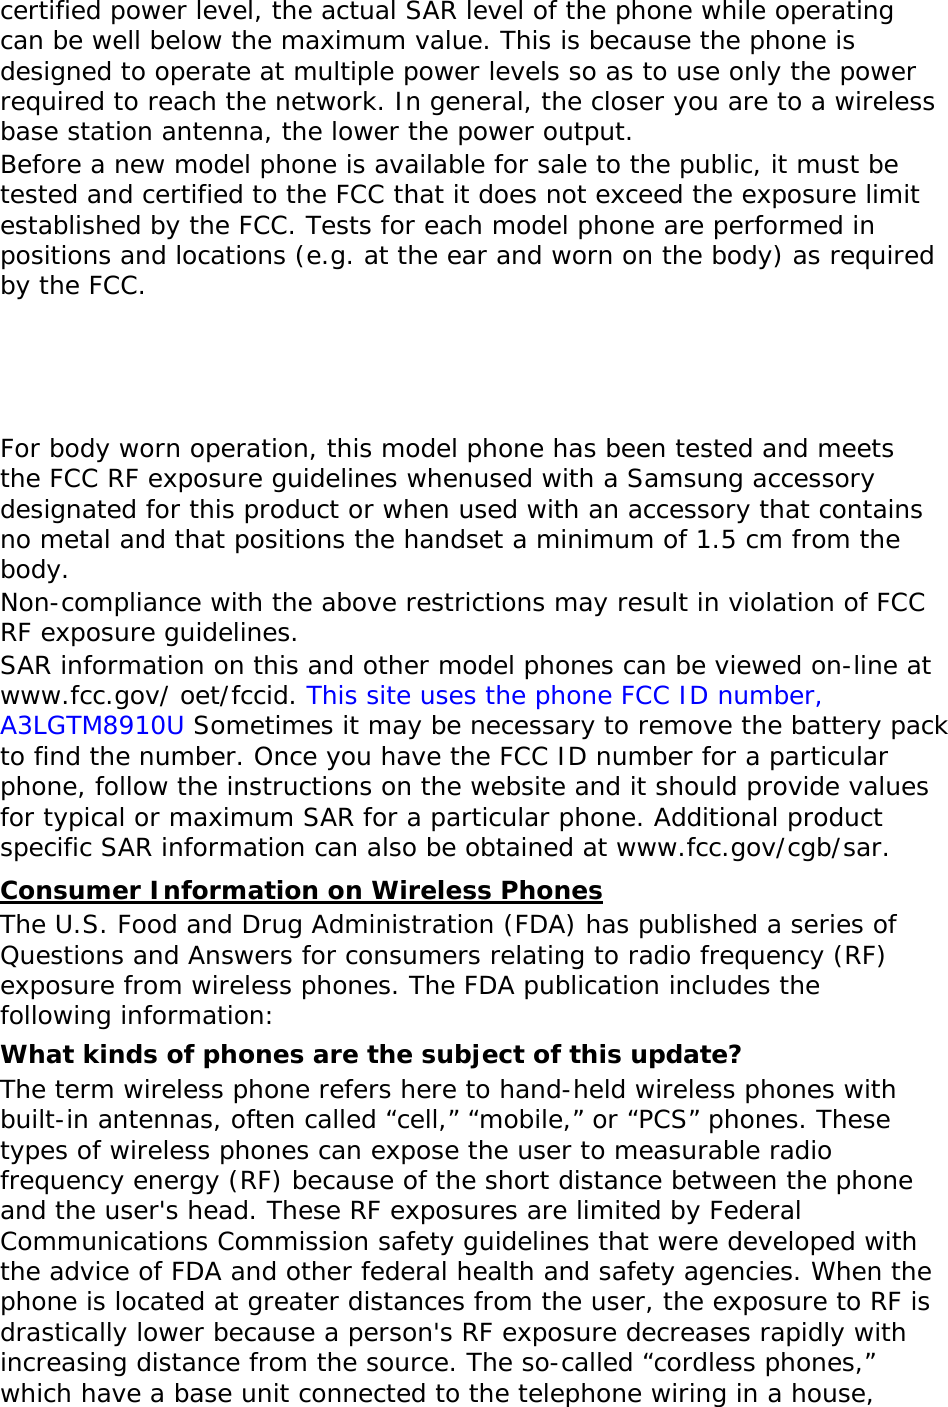 certified power level, the actual SAR level of the phone while operating can be well below the maximum value. This is because the phone is designed to operate at multiple power levels so as to use only the power required to reach the network. In general, the closer you are to a wireless base station antenna, the lower the power output. Before a new model phone is available for sale to the public, it must be tested and certified to the FCC that it does not exceed the exposure limit established by the FCC. Tests for each model phone are performed in positions and locations (e.g. at the ear and worn on the body) as required by the FCC.      For body worn operation, this model phone has been tested and meets the FCC RF exposure guidelines whenused with a Samsung accessory designated for this product or when used with an accessory that contains no metal and that positions the handset a minimum of 1.5 cm from the body.  Non-compliance with the above restrictions may result in violation of FCC RF exposure guidelines. SAR information on this and other model phones can be viewed on-line at www.fcc.gov/ oet/fccid. This site uses the phone FCC ID number, A3LGTM8910U Sometimes it may be necessary to remove the battery pack to find the number. Once you have the FCC ID number for a particular phone, follow the instructions on the website and it should provide values for typical or maximum SAR for a particular phone. Additional product specific SAR information can also be obtained at www.fcc.gov/cgb/sar. Consumer Information on Wireless Phones The U.S. Food and Drug Administration (FDA) has published a series of Questions and Answers for consumers relating to radio frequency (RF) exposure from wireless phones. The FDA publication includes the following information: What kinds of phones are the subject of this update? The term wireless phone refers here to hand-held wireless phones with built-in antennas, often called “cell,” “mobile,” or “PCS” phones. These types of wireless phones can expose the user to measurable radio frequency energy (RF) because of the short distance between the phone and the user&apos;s head. These RF exposures are limited by Federal Communications Commission safety guidelines that were developed with the advice of FDA and other federal health and safety agencies. When the phone is located at greater distances from the user, the exposure to RF is drastically lower because a person&apos;s RF exposure decreases rapidly with increasing distance from the source. The so-called “cordless phones,” which have a base unit connected to the telephone wiring in a house, 